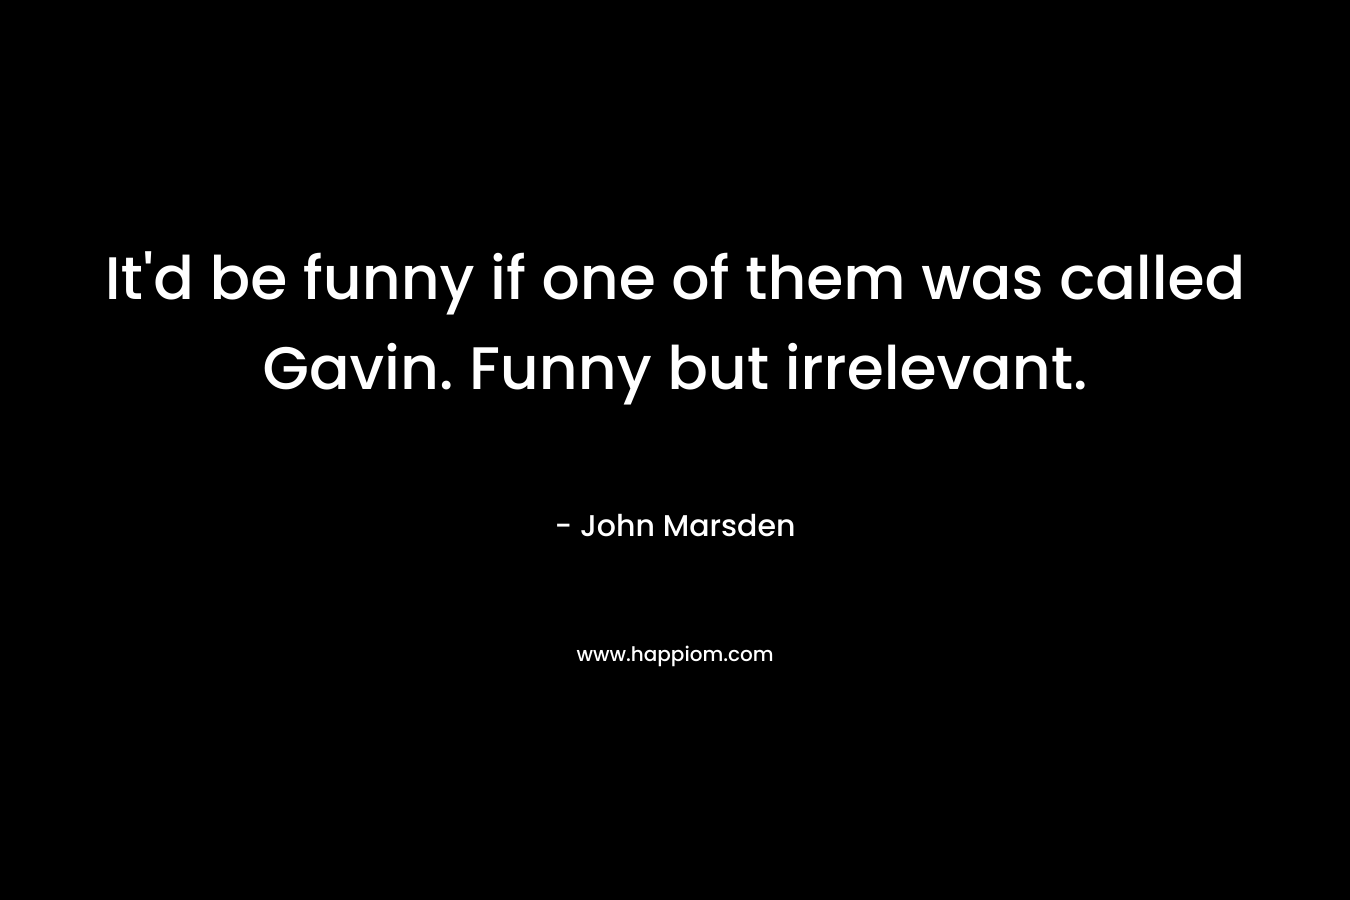 It’d be funny if one of them was called Gavin. Funny but irrelevant. – John Marsden